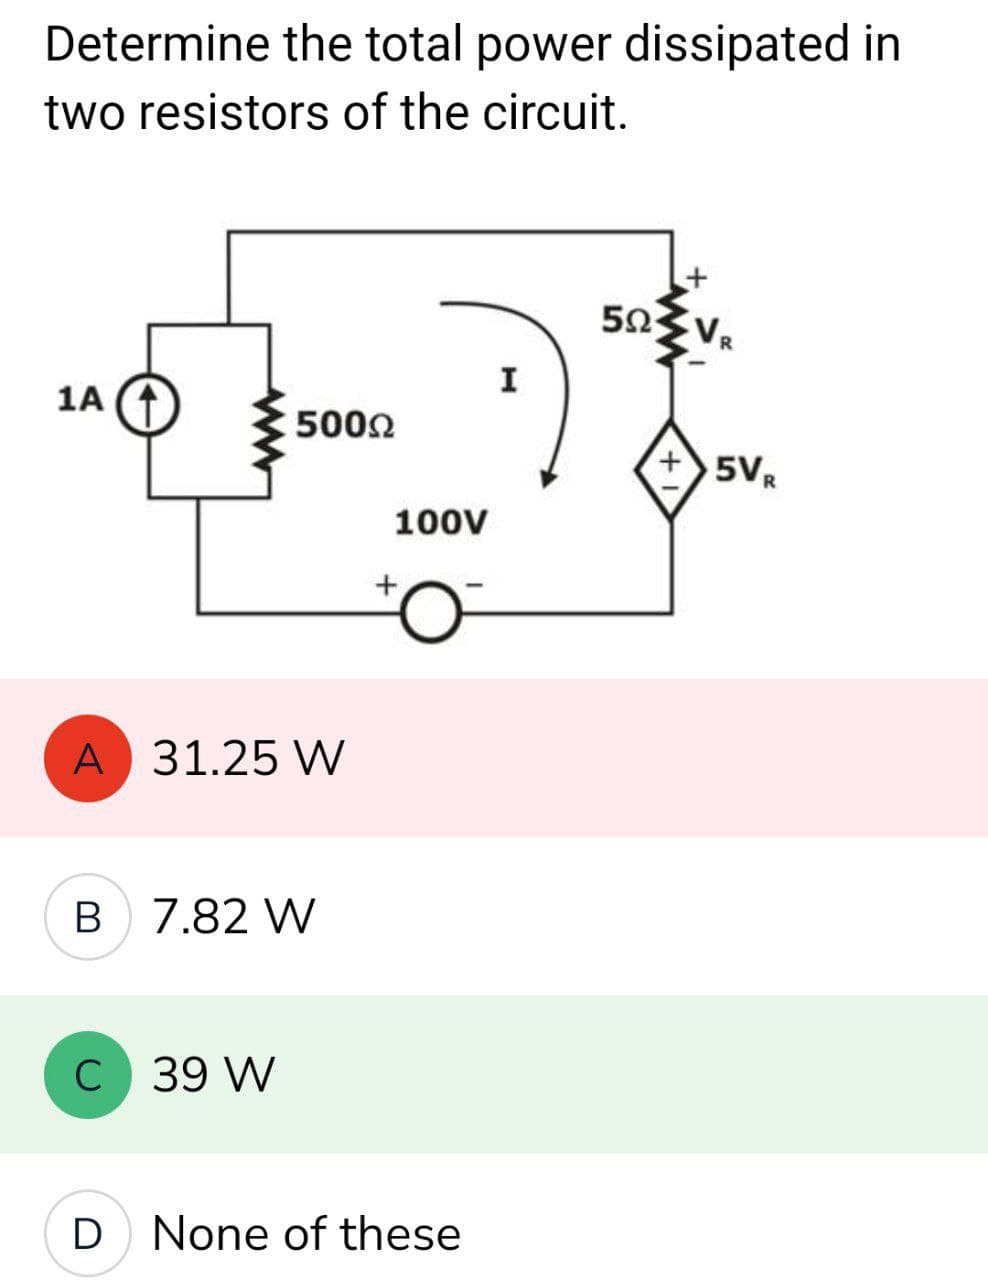 Determine the total power dissipated in
two resistors of the circuit.
1A (†
500Ω
A 31.25 W
B 7.82 W
C 39 W
100V
+
None of these
I
5ΩΣ VR
+5VR